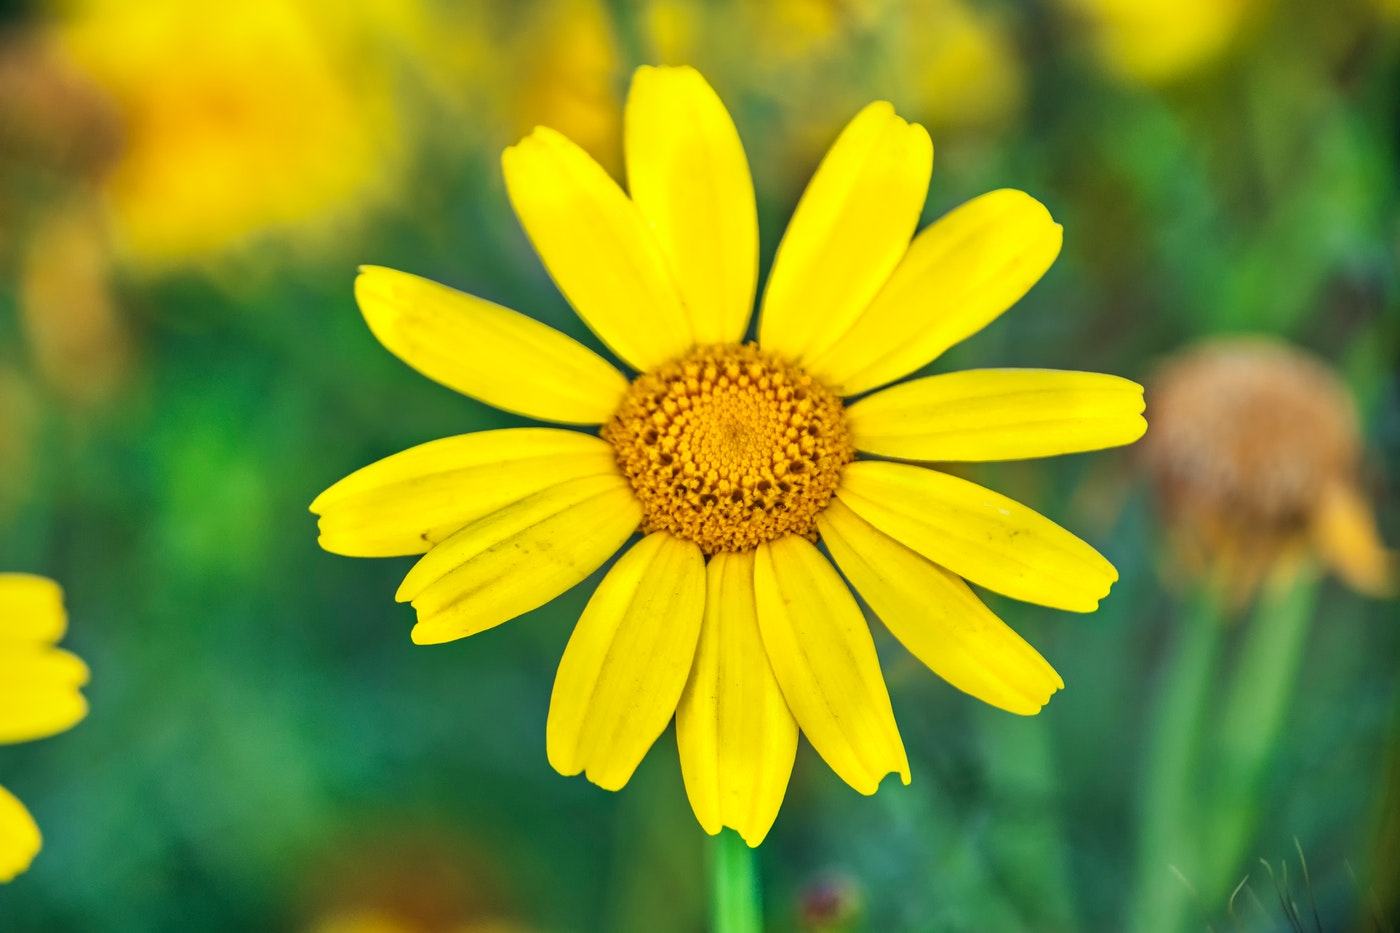 pictures of yellow daisies - yellow daisies - complete guide